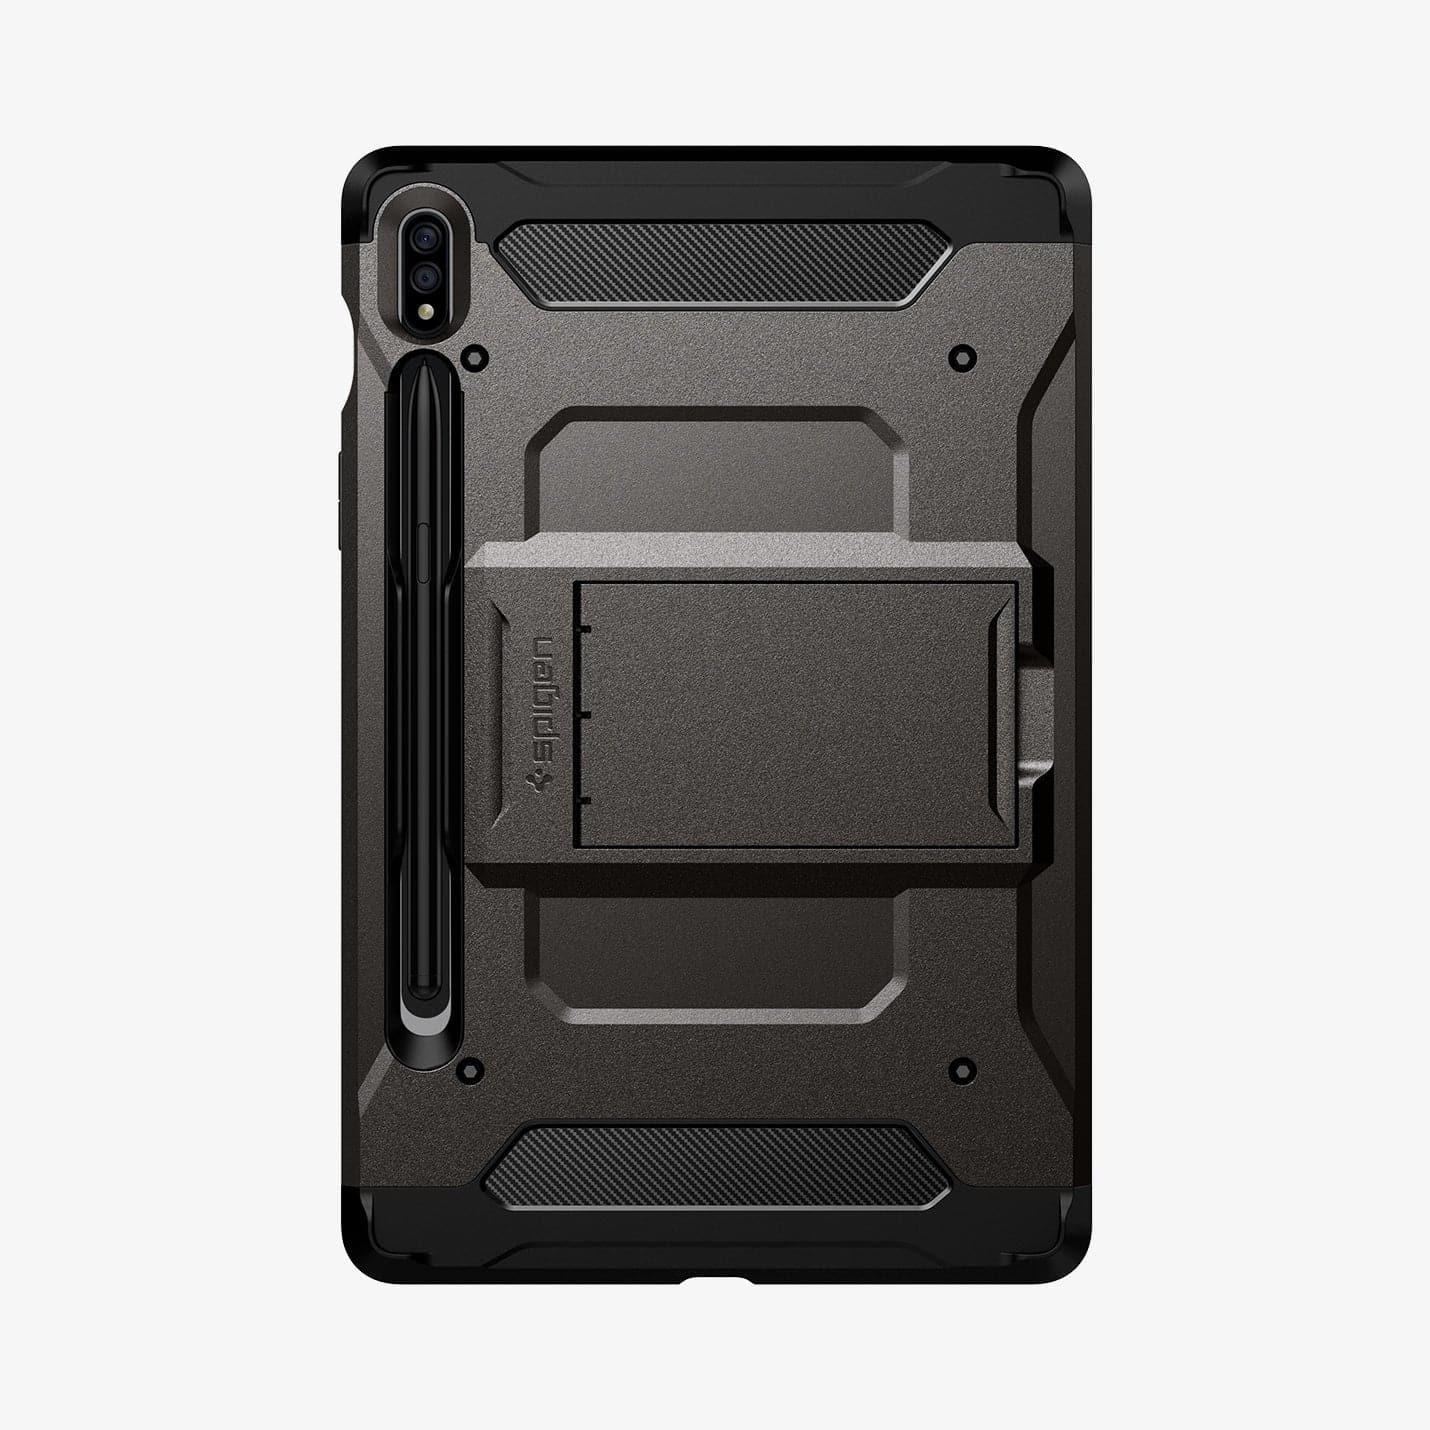 ACS01605 - Galaxy Tab S8 Case Tough Armor Pro in gunmetal showing the back